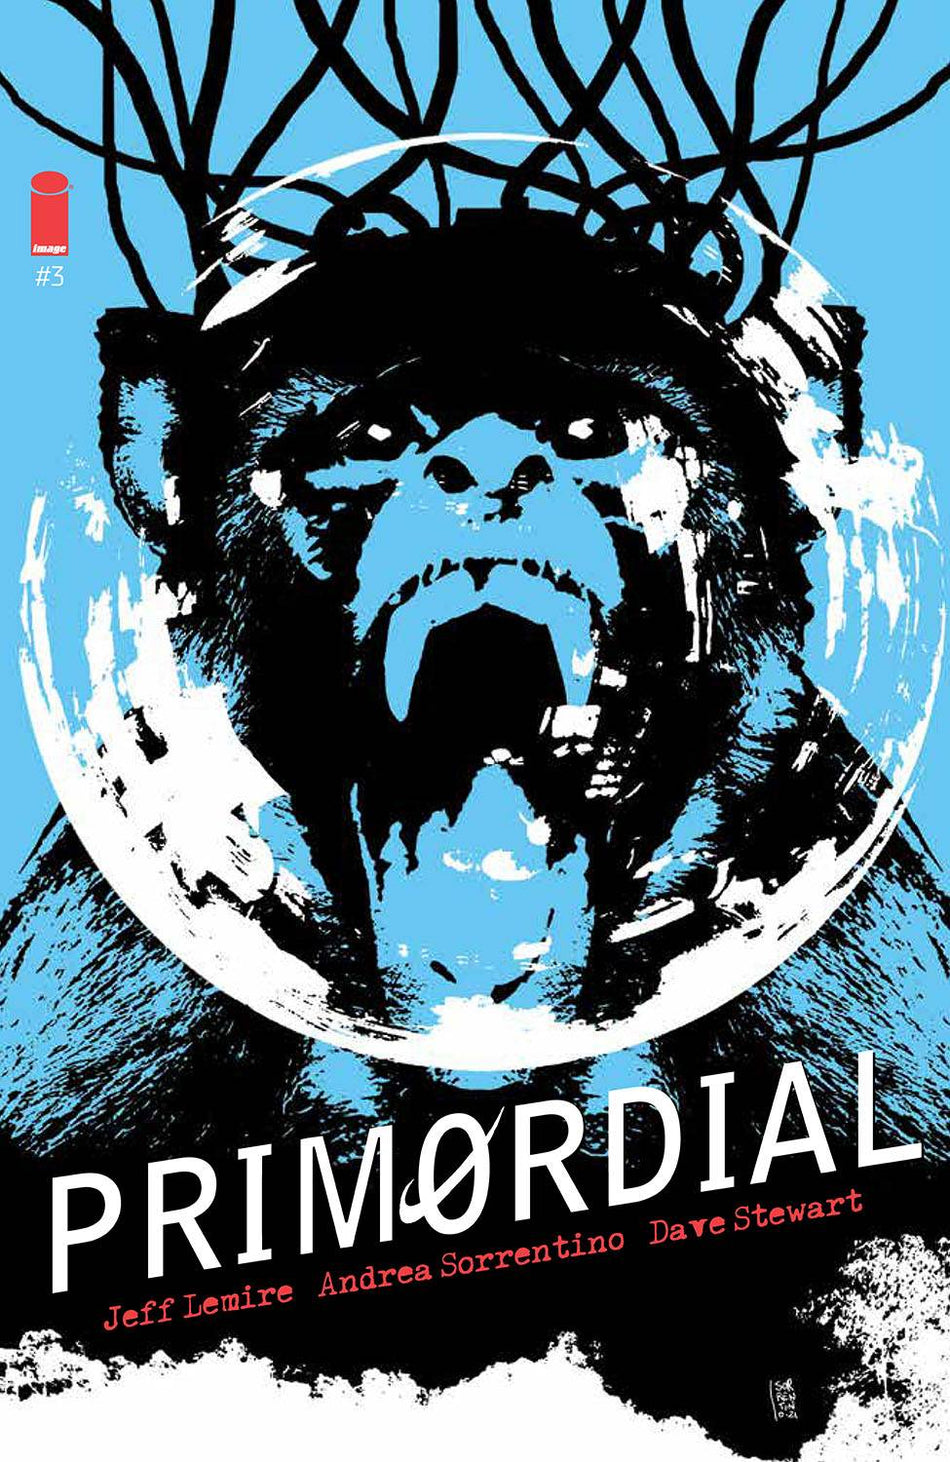 Photo of Primordial Issue 3 (of 6) CVR A Sorrentino comic sold by Stronghold Collectibles